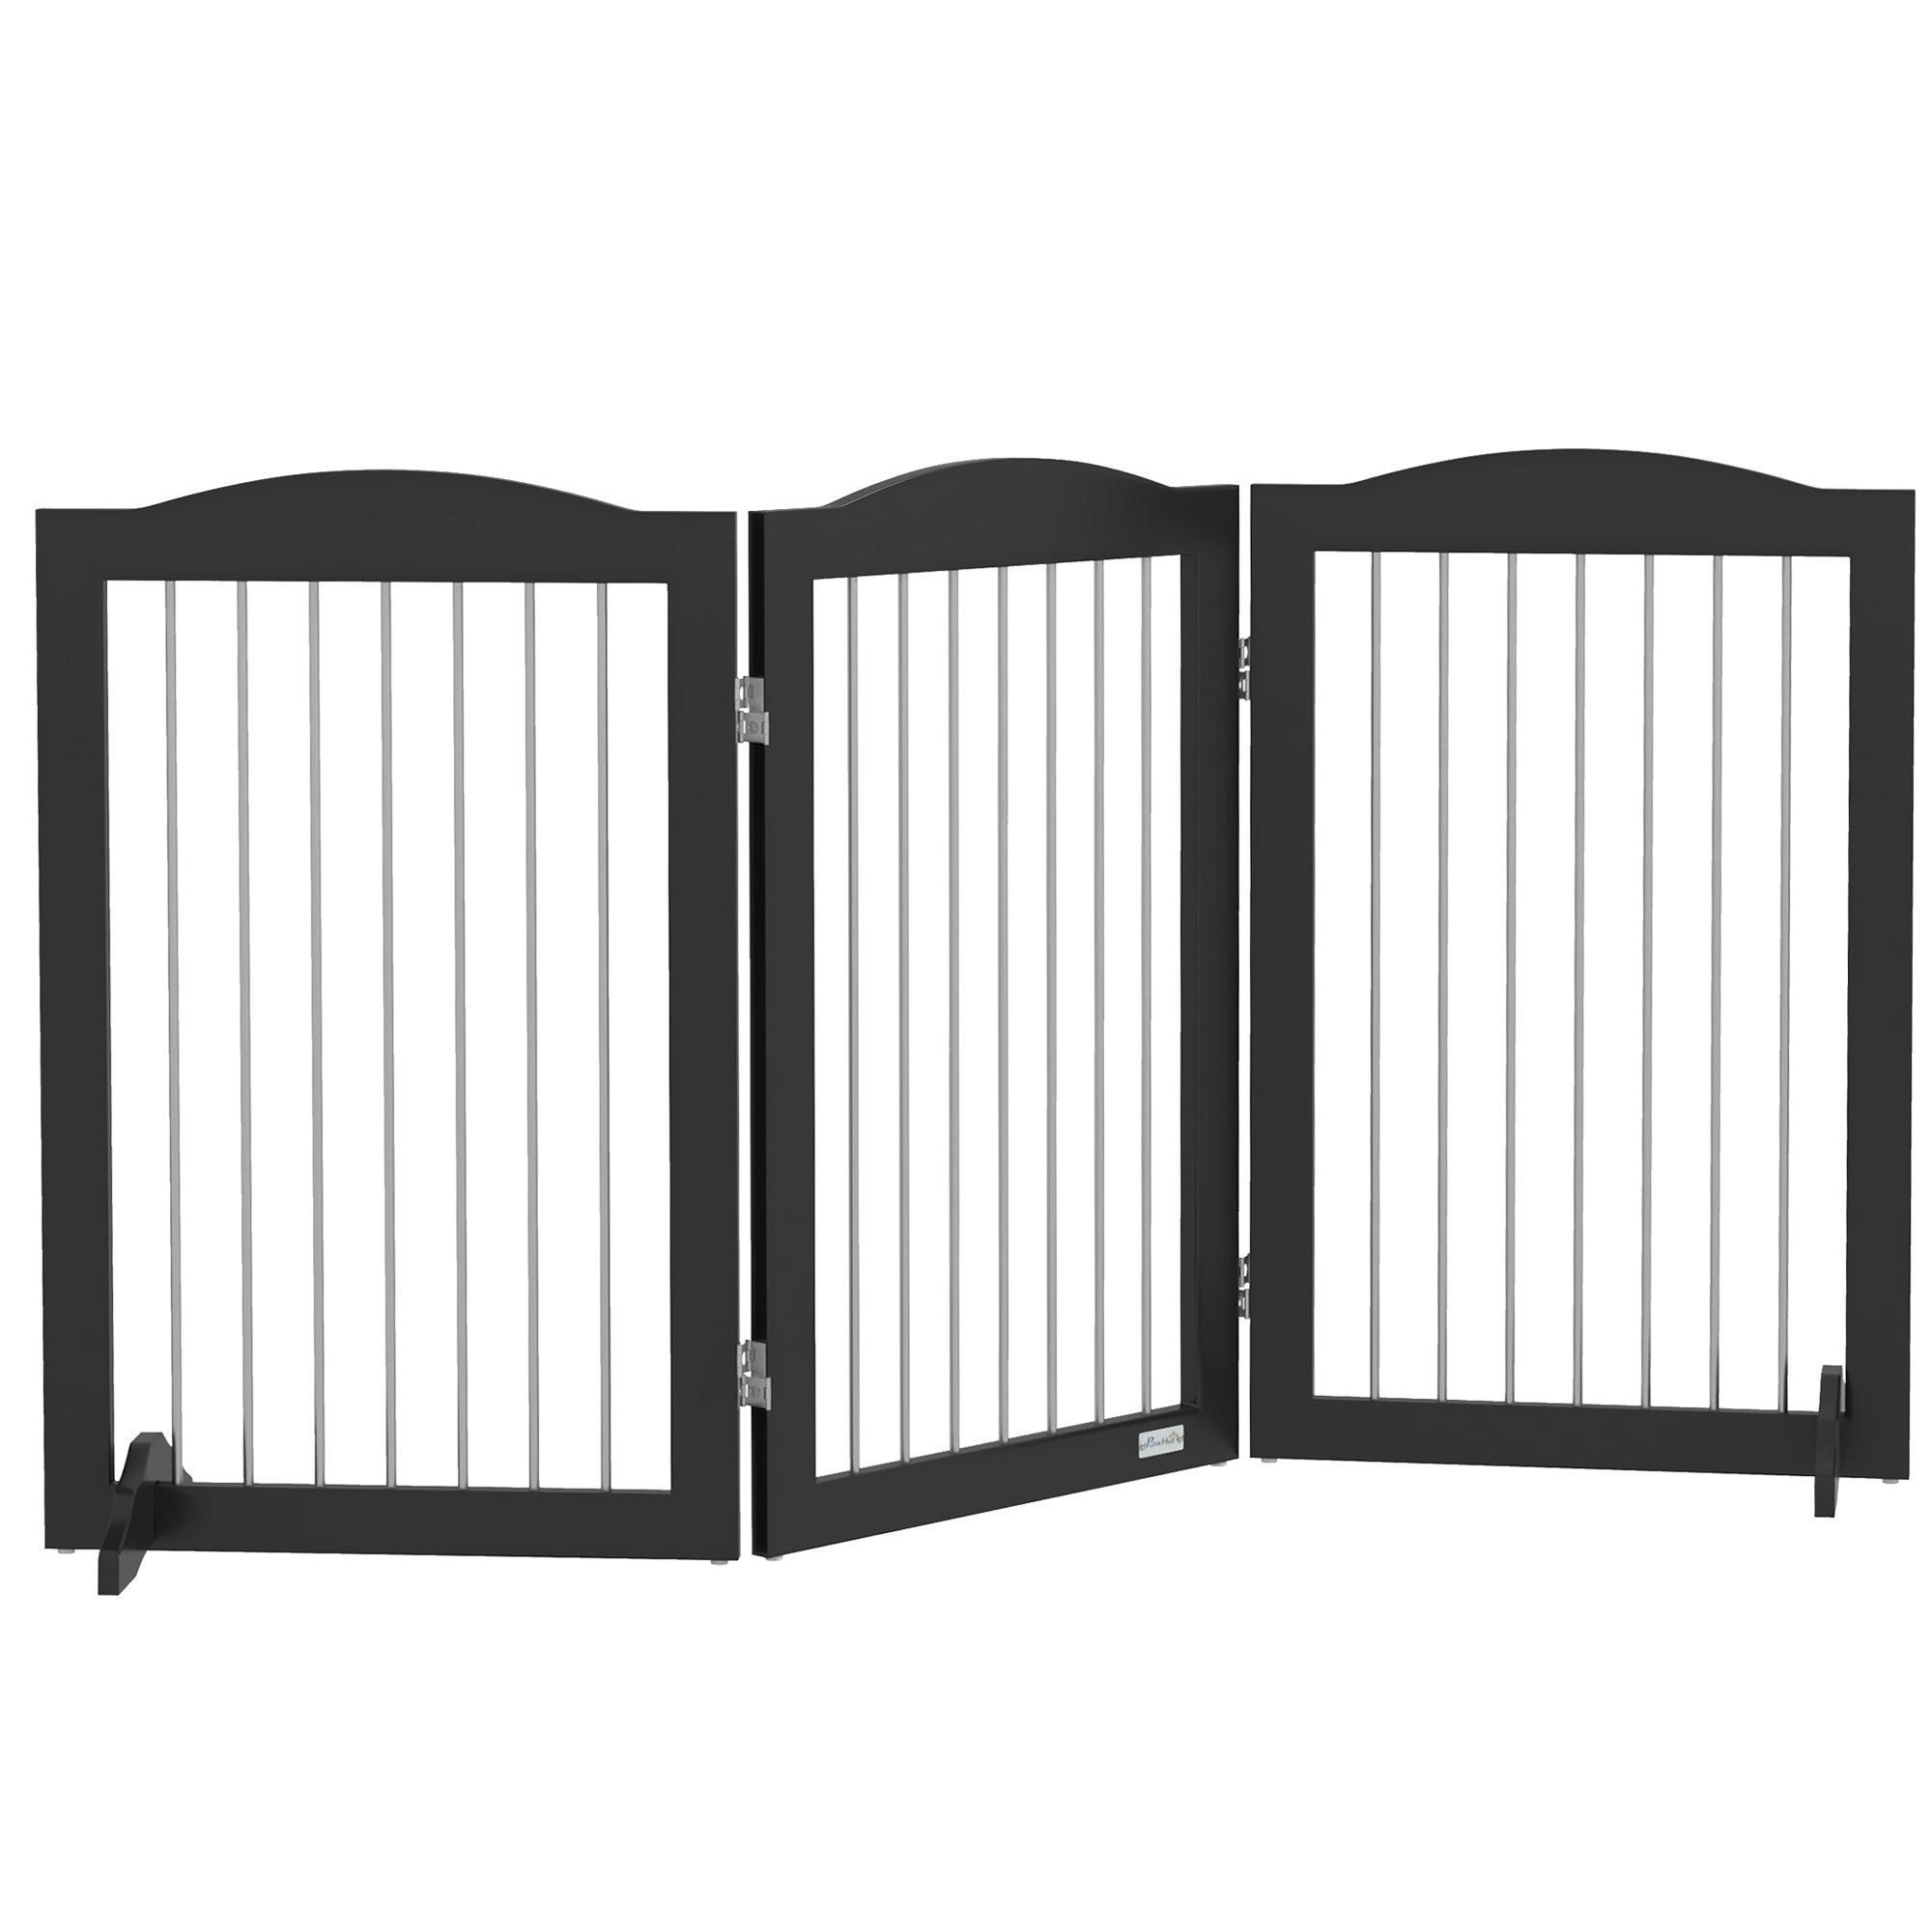 Foldable Dog Gate for Doorways, Stairs, Halls